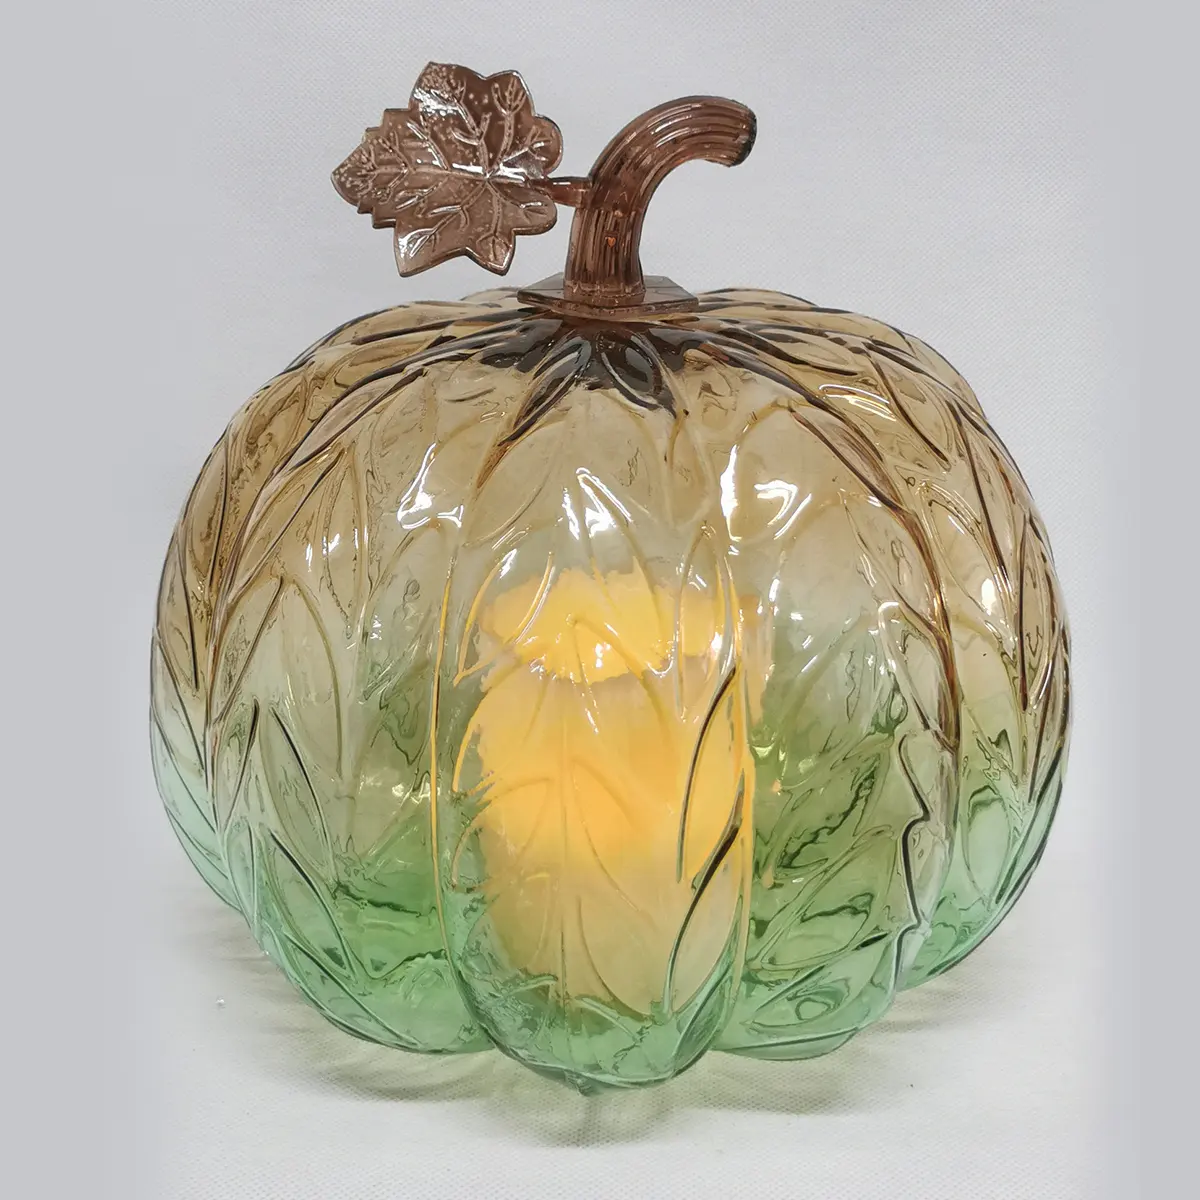 Wholesale Artificial Lighted Glass Halloween Home Table Decoration Ideas Indoor Pumpkin Candle Cloche Led Ornaments